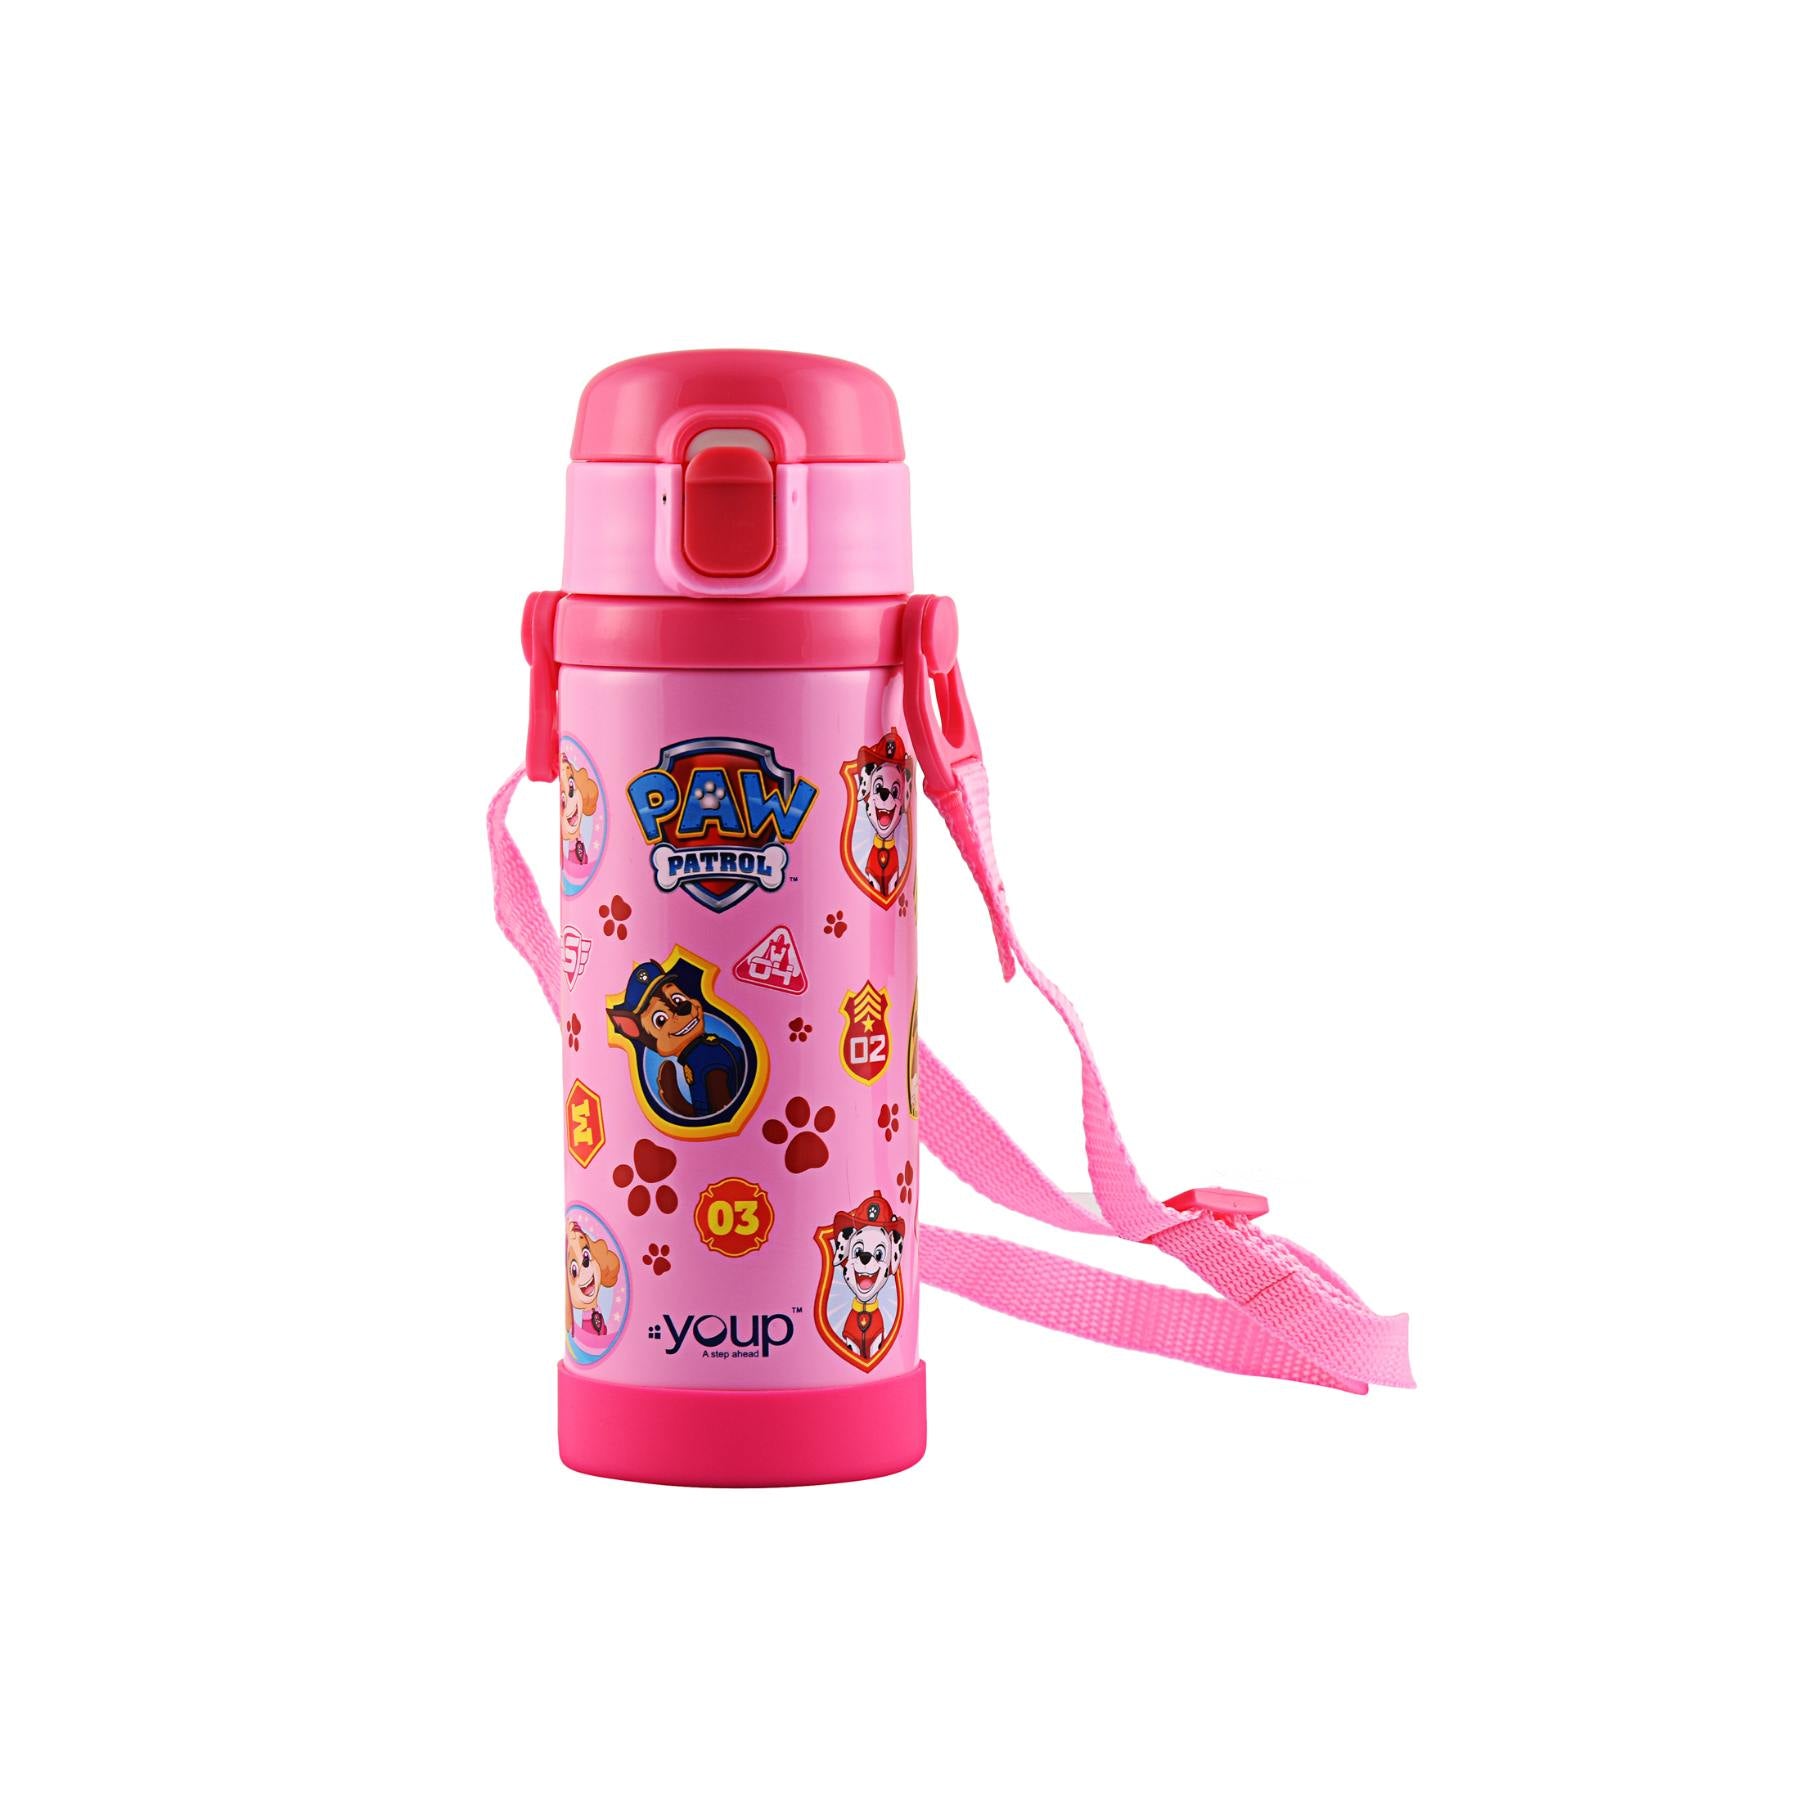 Youp Stainless Steel Insulated Pink Color Paw Patrol Kids Sipper Bottle SCOOBY - 500 ml